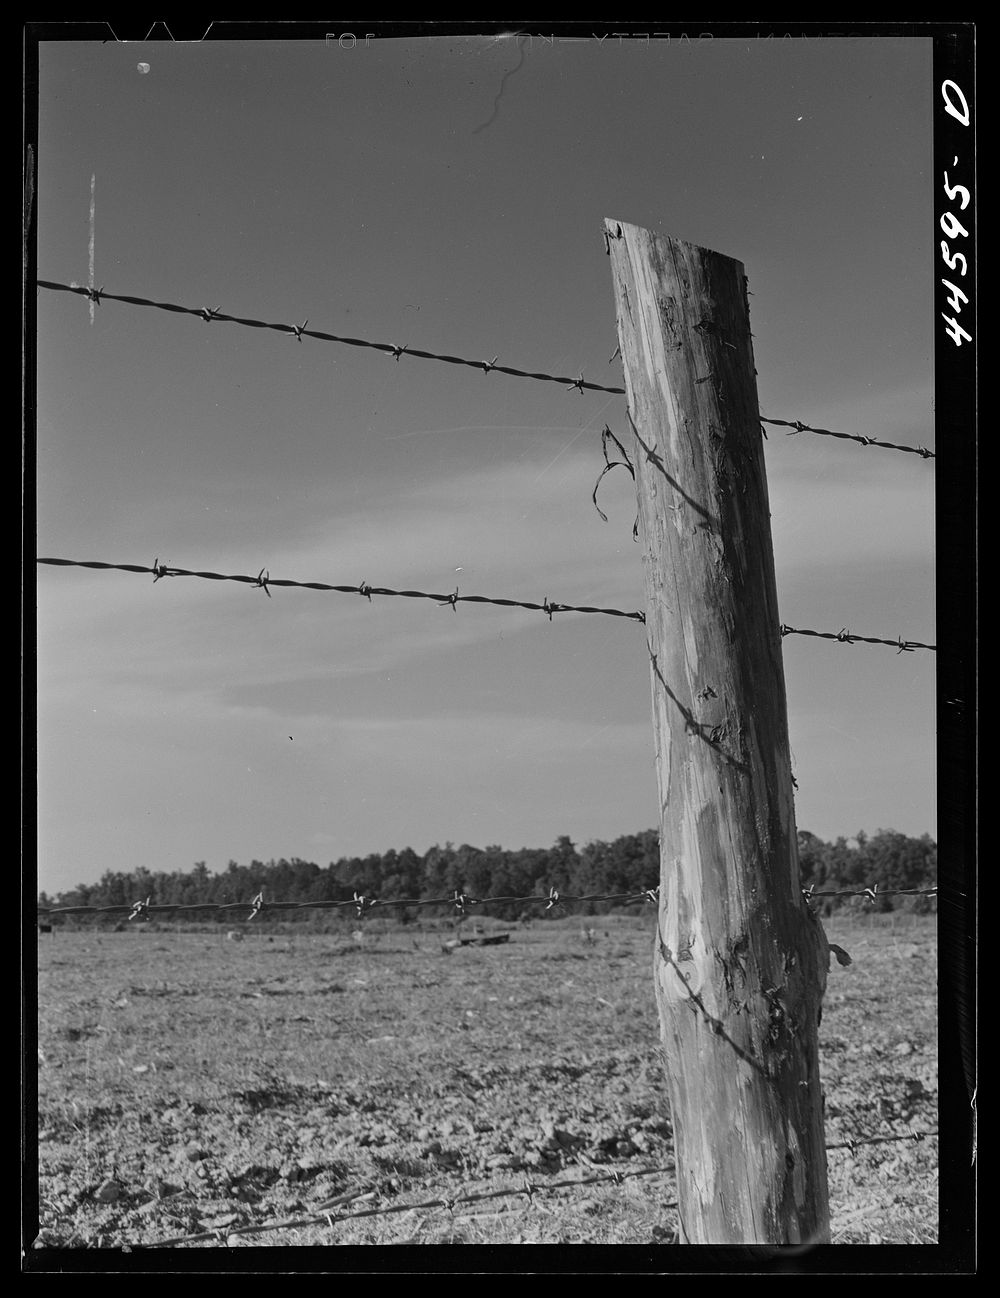 A FSA (Farm Security Administration) fence post. Greene County, Georgia. Sourced from the Library of Congress.